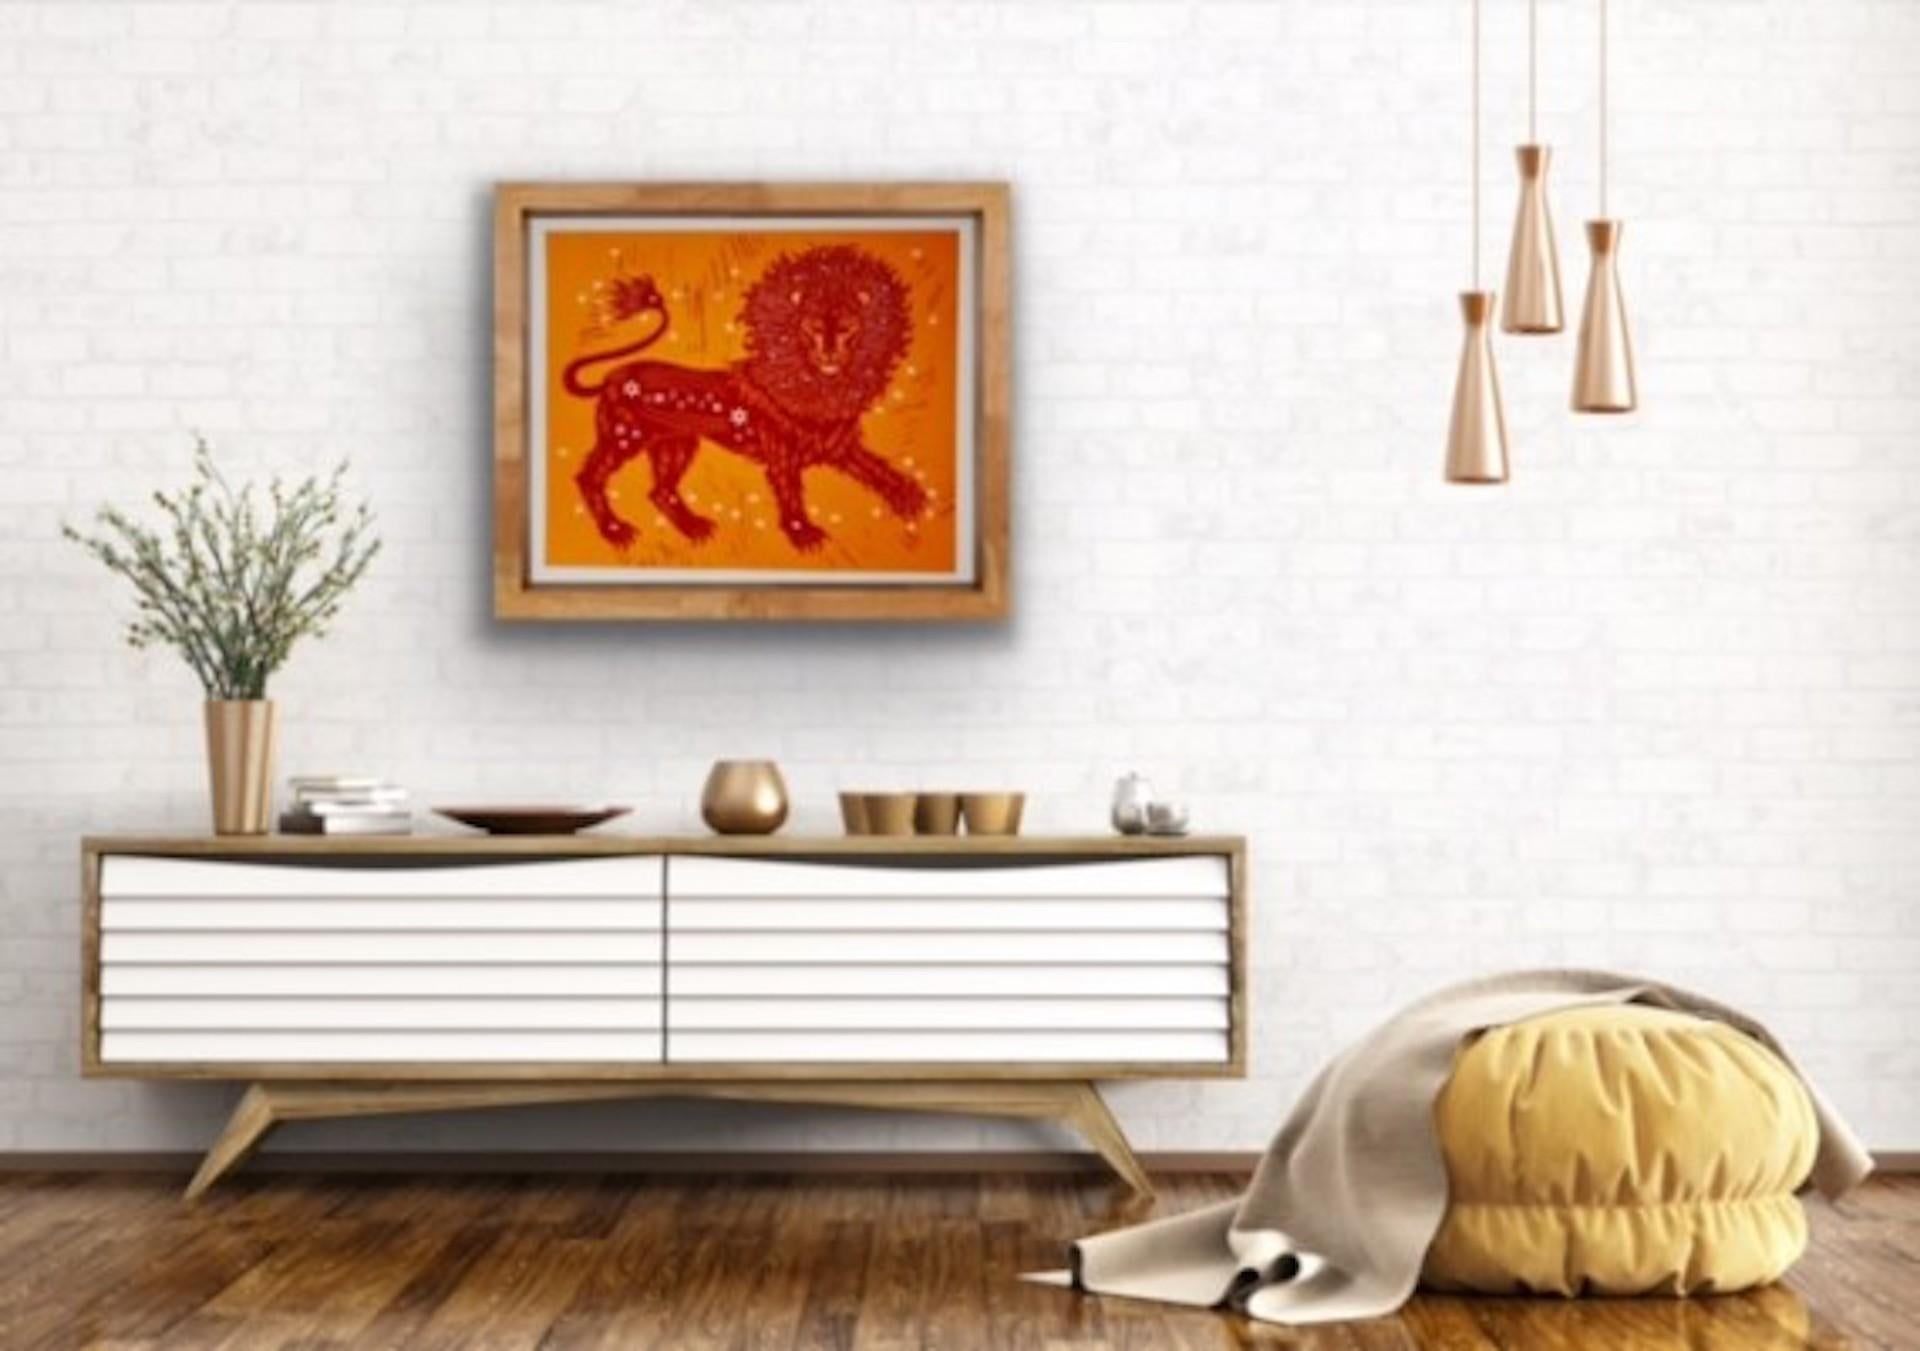 Sun Lion by Kate Willows [2021]
limited edition

Ink on Paper

Edition of 50

Image size: H:23 cm x W:28 cm

Sold Unframed

Please note that insitu images are purely an indication of how a piece may look

An original limited edition two-block